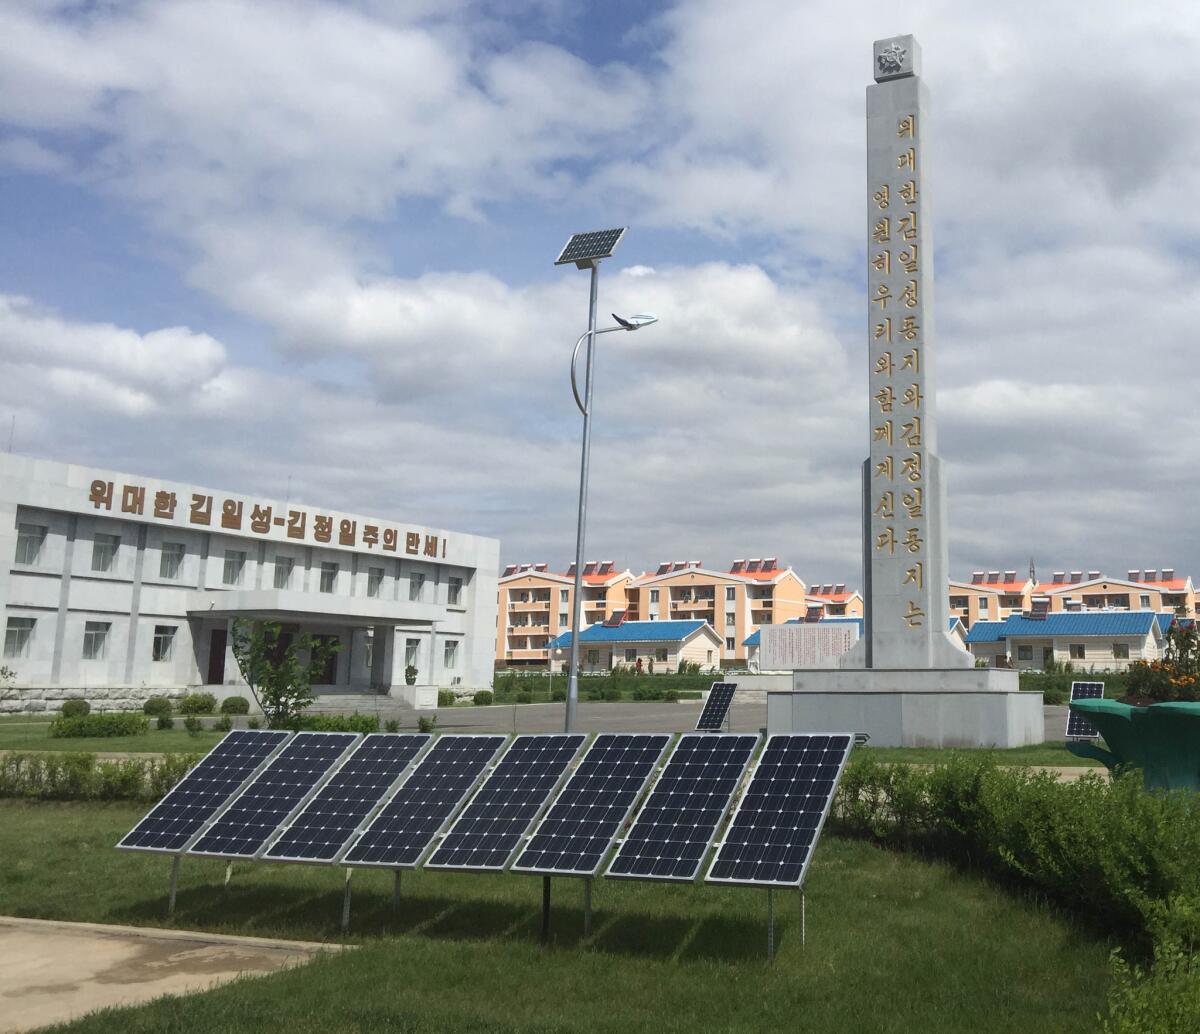 Solar panels, and a solar powered streetlight, at a farm complex on the outskirts of Pyongyang, North Korea. The worker housing in the distance has solar water heaters on the roof. (Julie Makinen / Los Angeles Times)